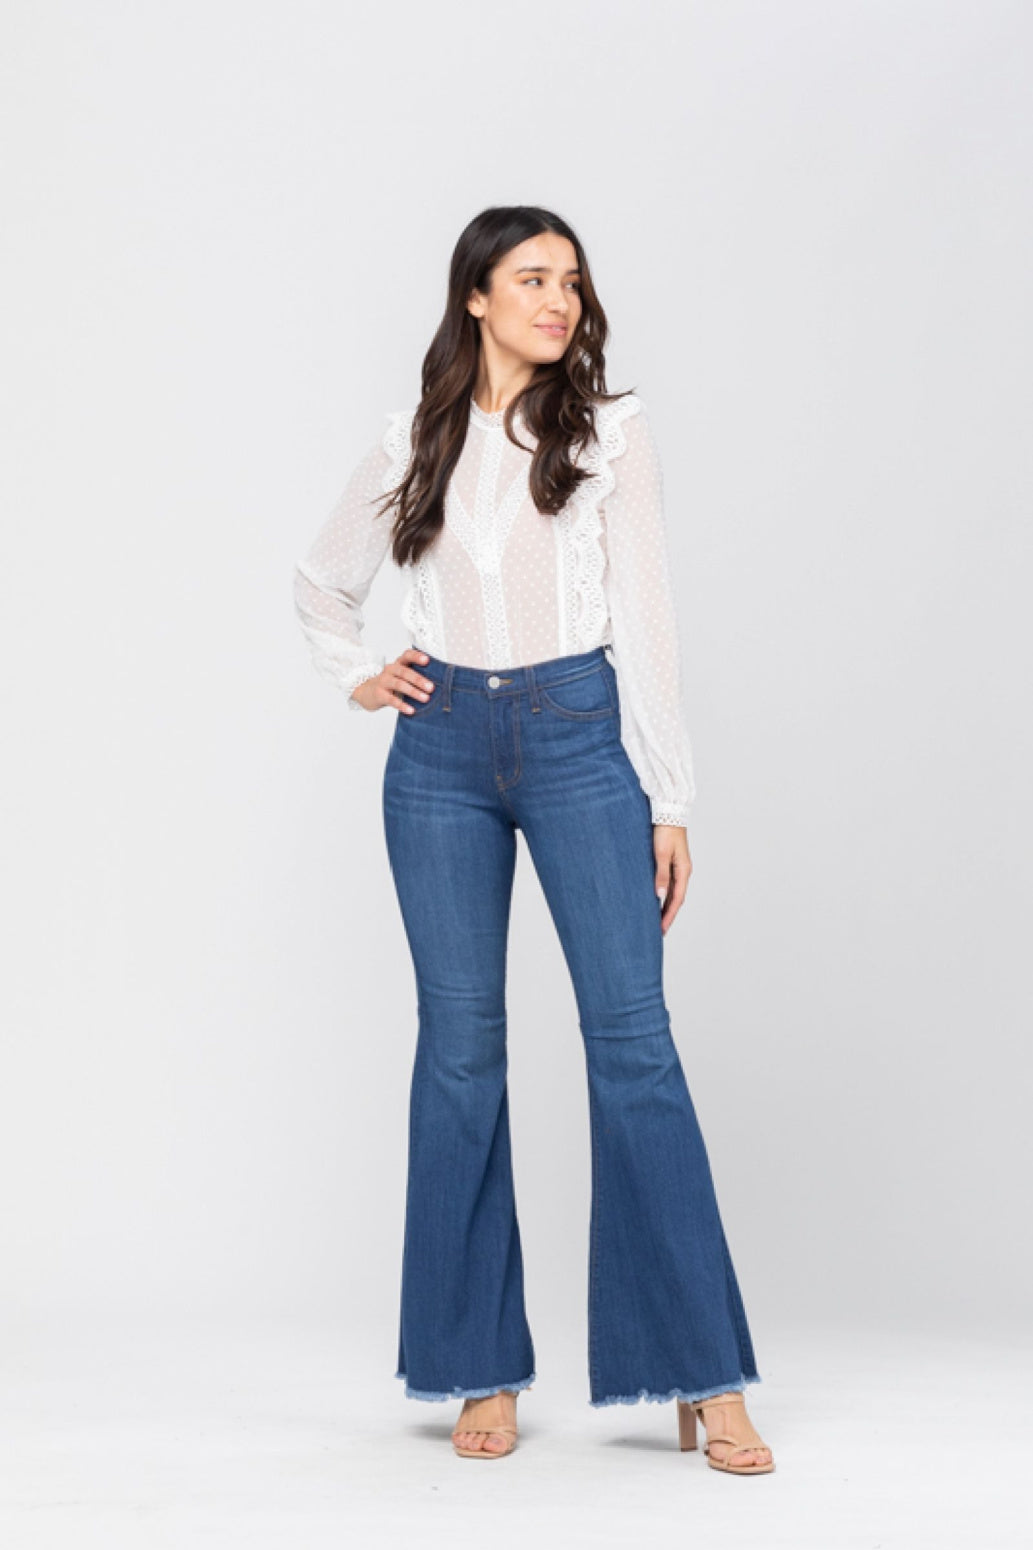 Judy Blue Super Flare Jeans Style 8396